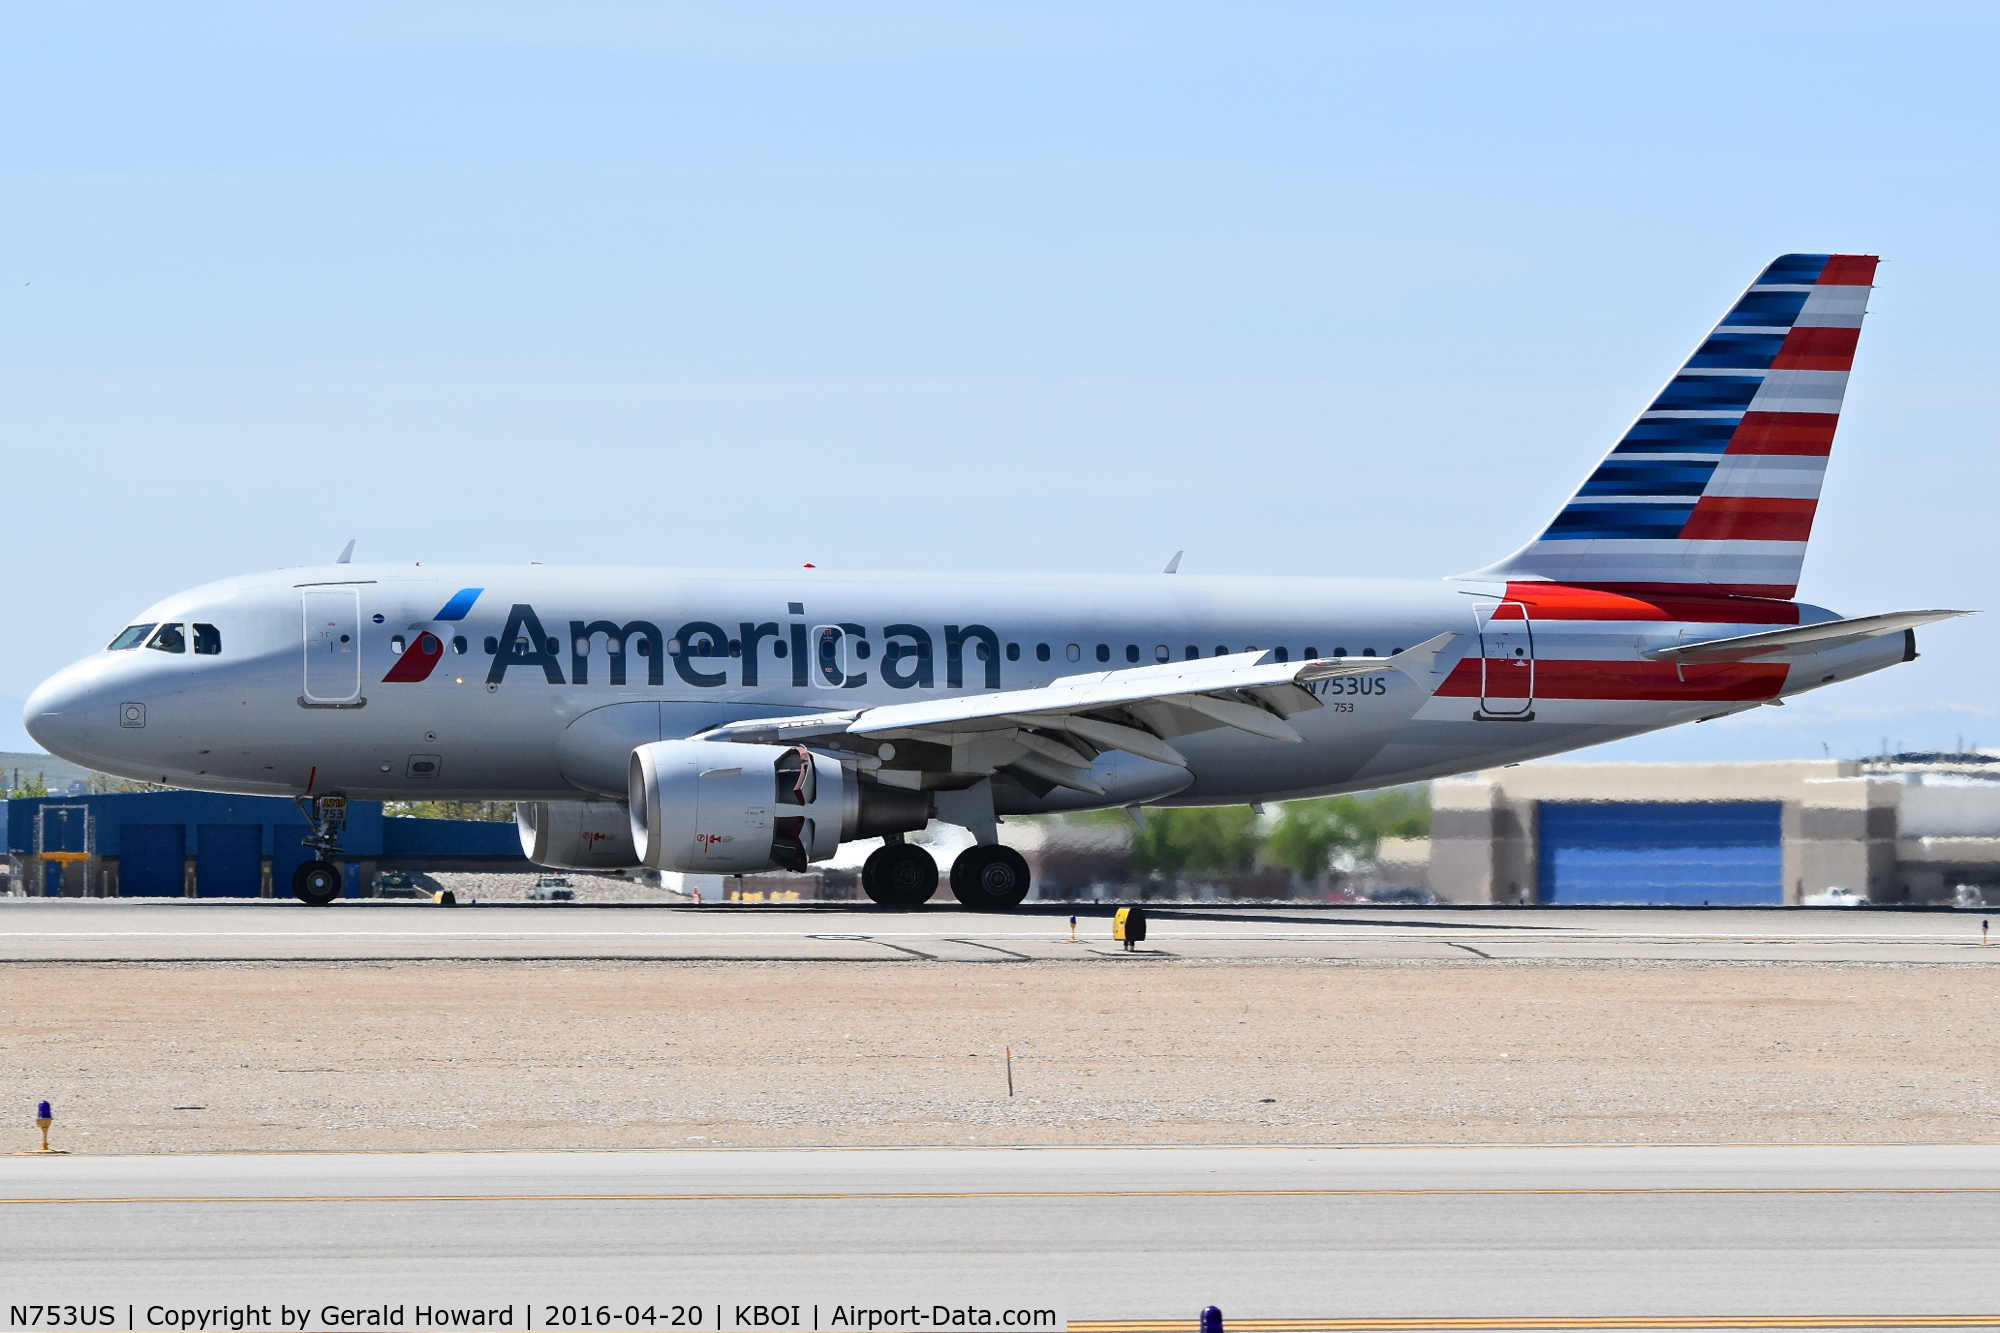 N753US, 2000 Airbus A319-112 C/N 1326, Landing roll out on RWY 10L.